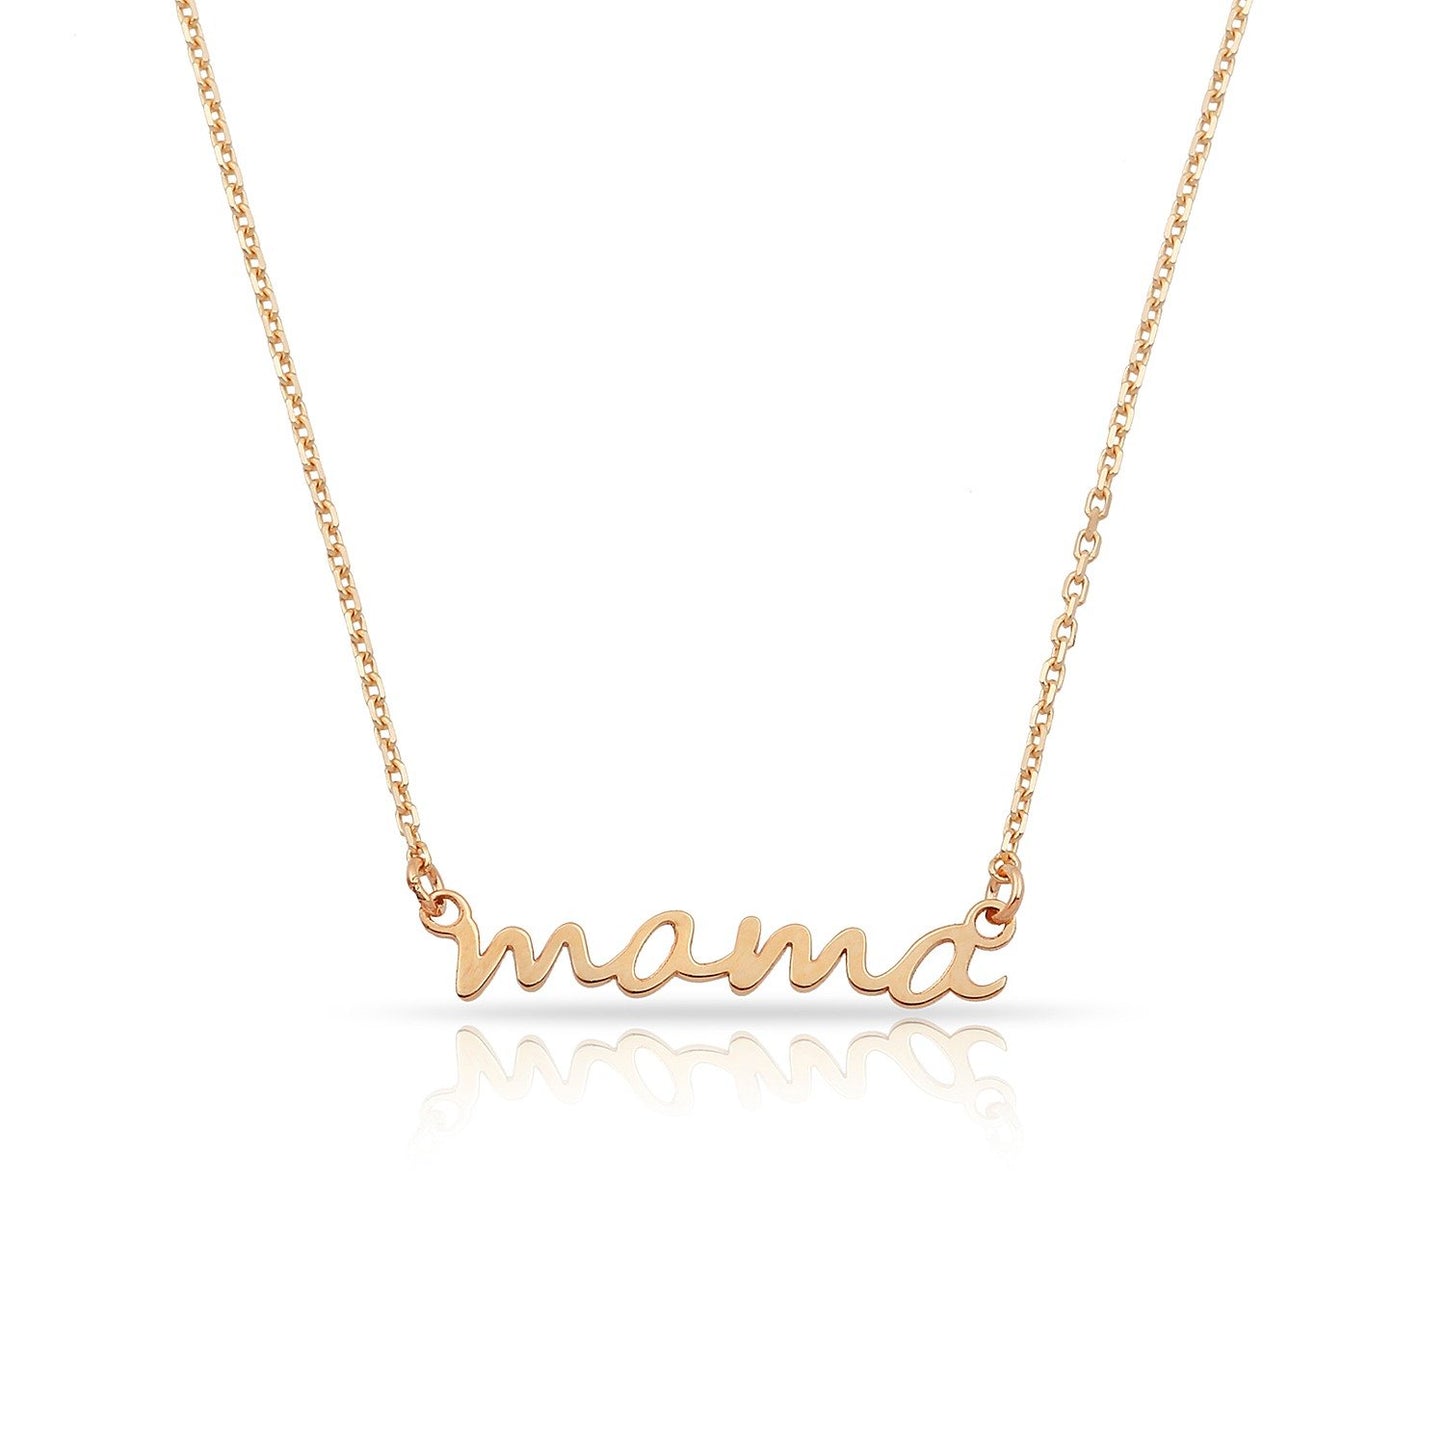 TSK 14k Gold Mama Script Necklace JEWELRY The Sis Kiss 14k Rose Gold